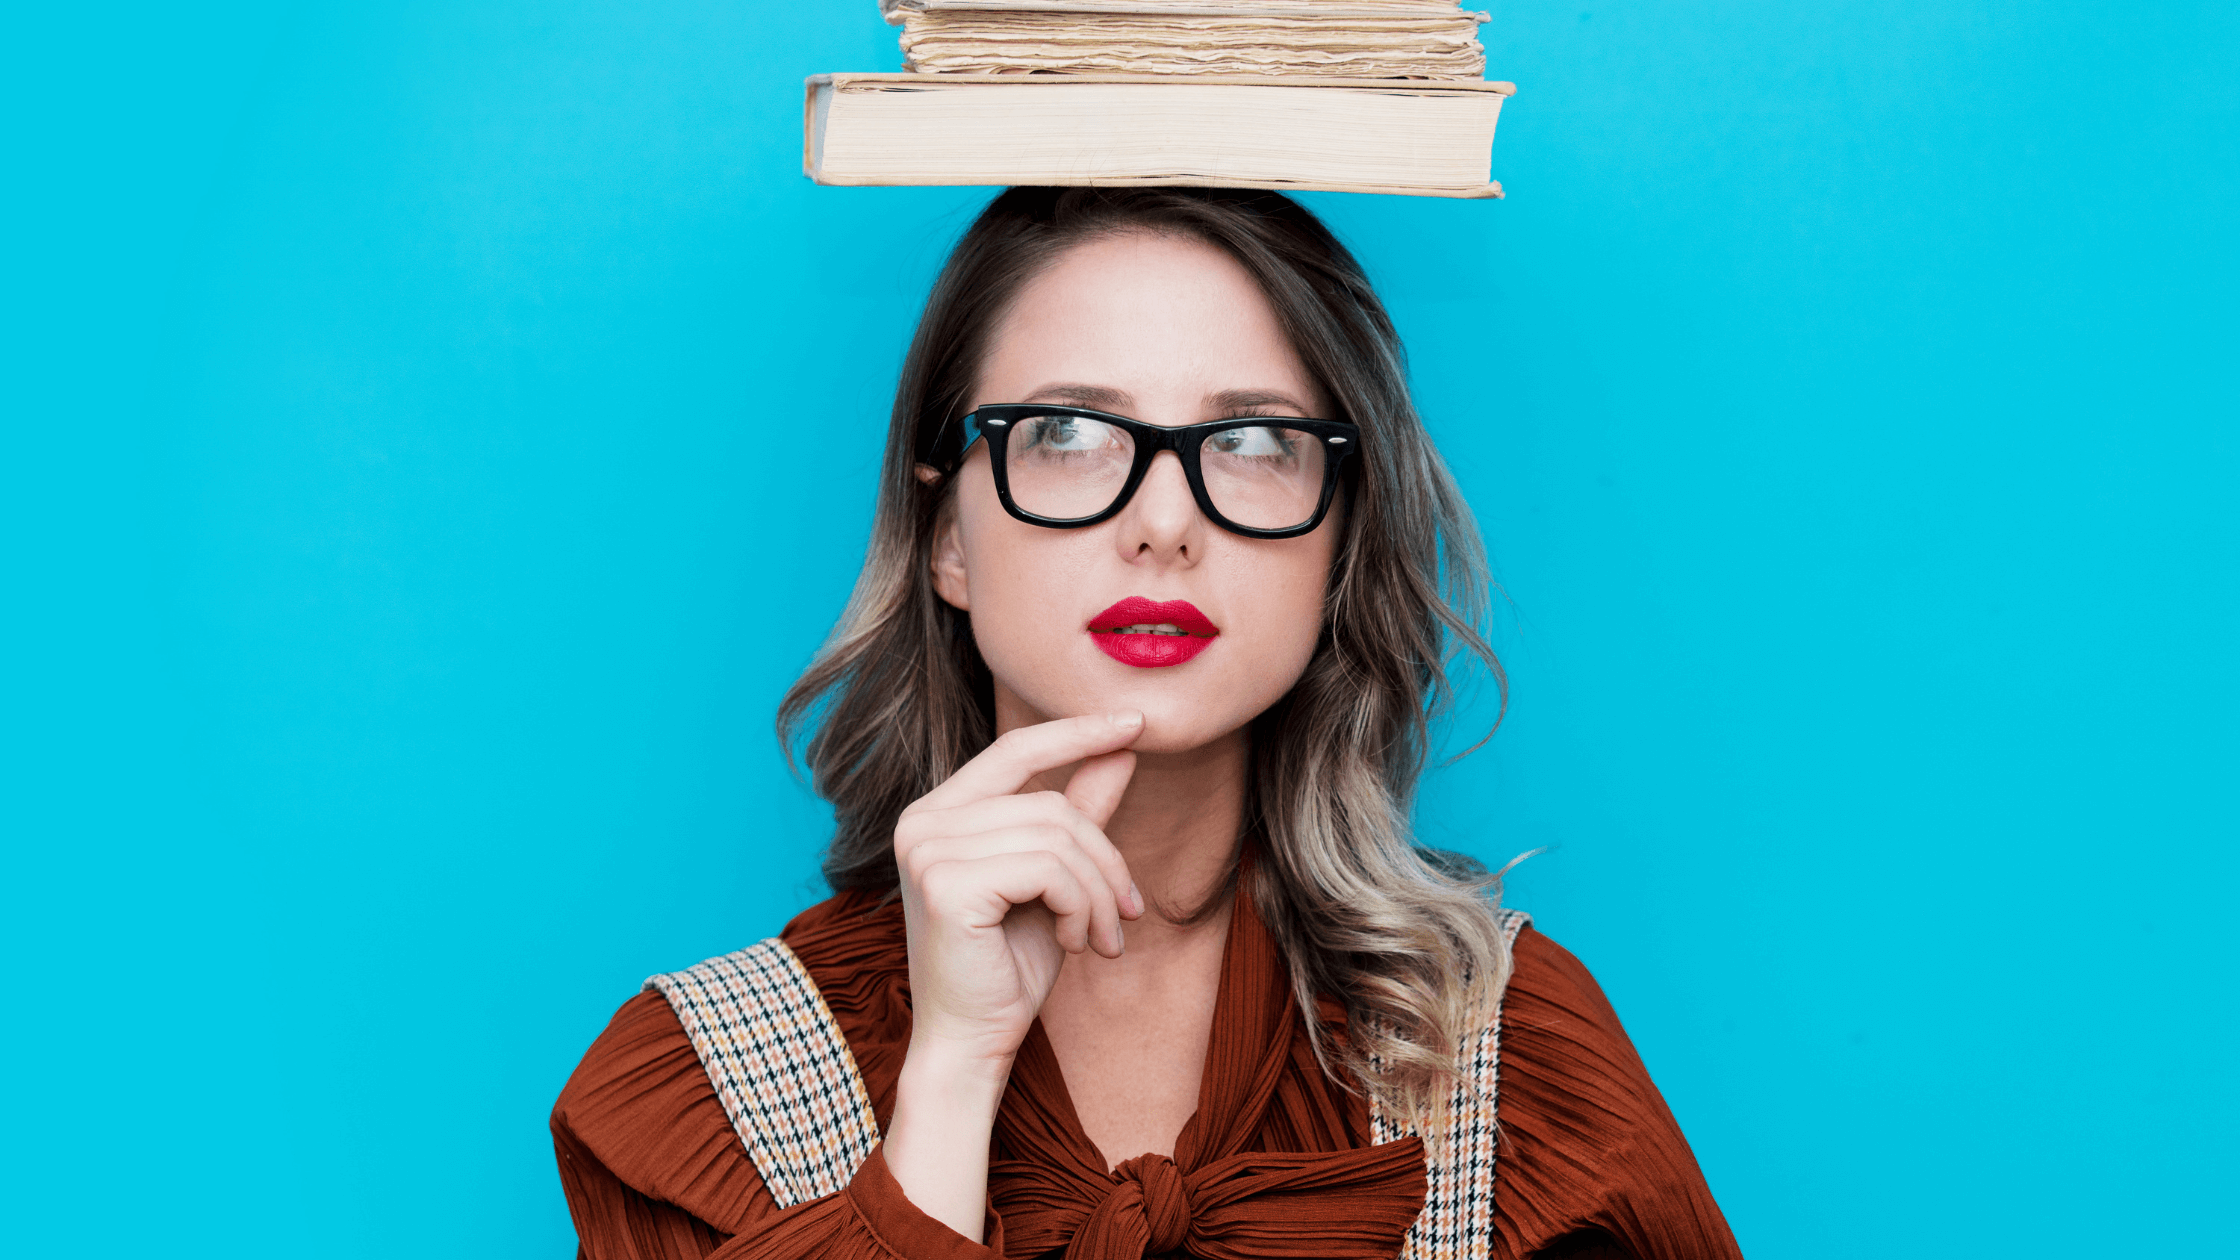 A woman balancing a book on her head and wondering how she can read more books since she's so busy.